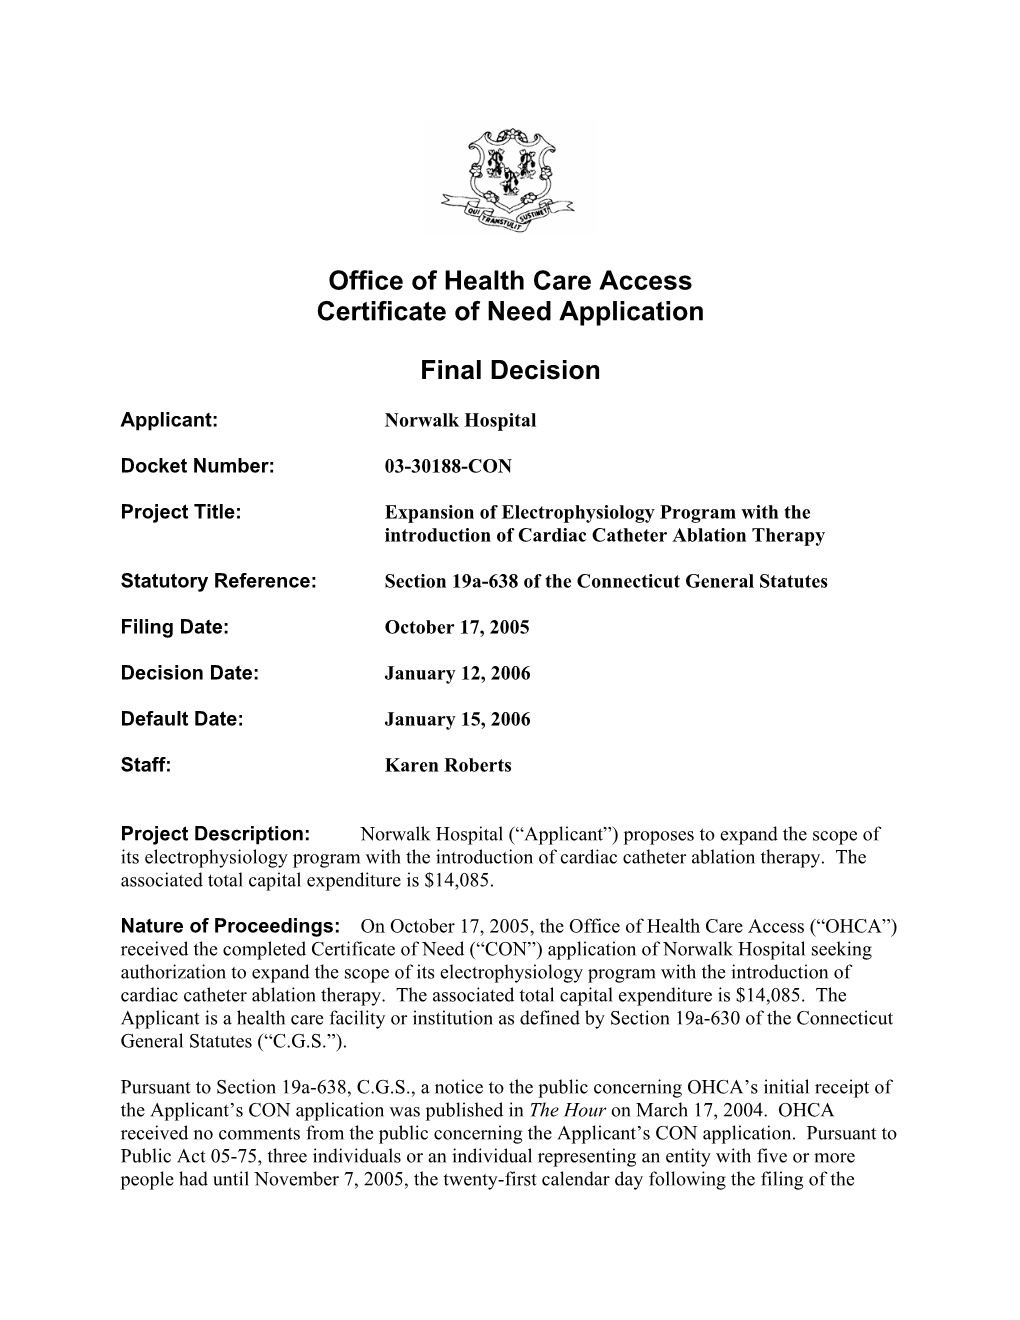 Office of Health Care Access Certificate of Need Application Final